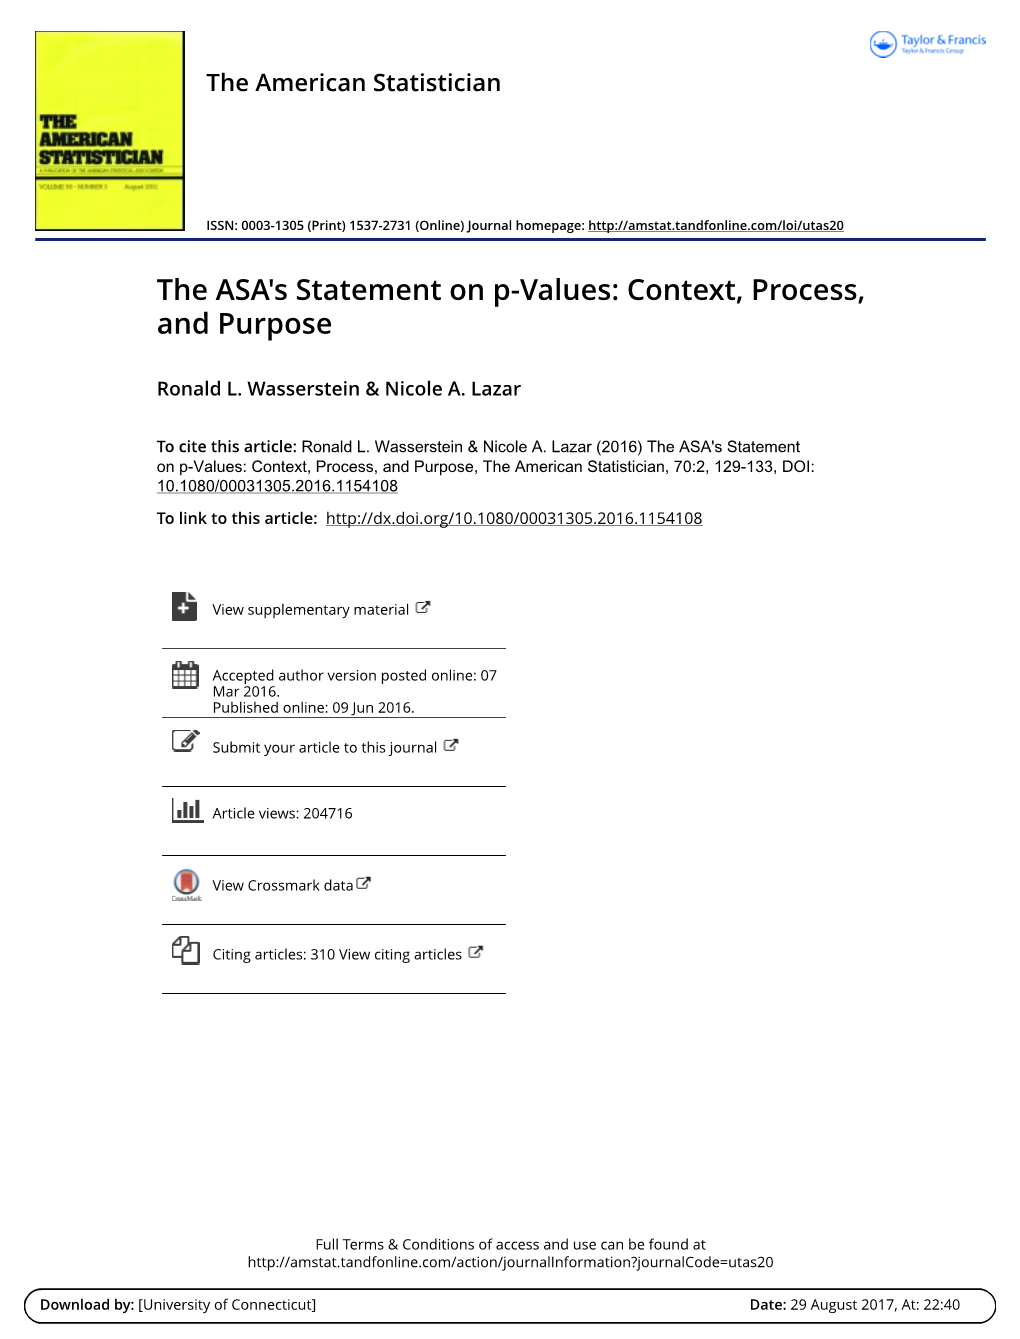 The ASA's Statement on P-Values: Context, Process, and Purpose